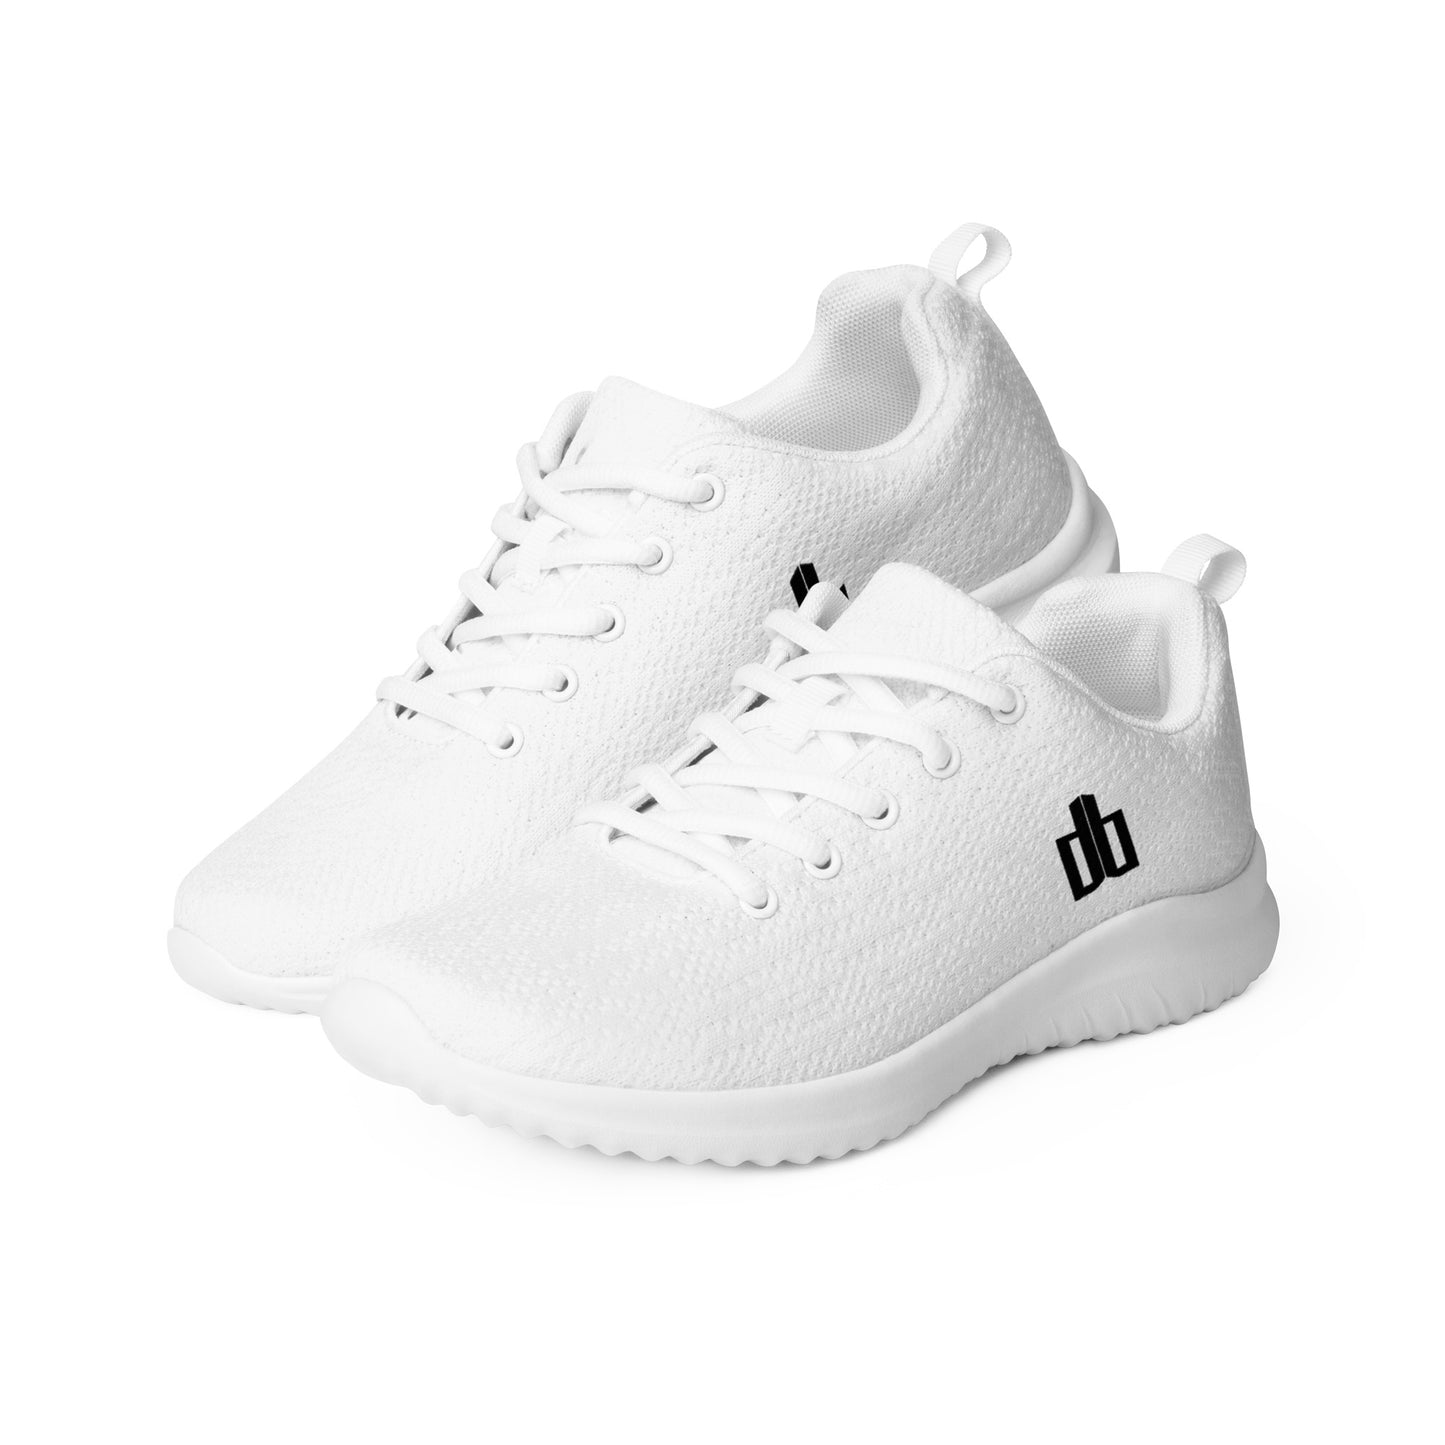 "COURT ONE" Men’s ultralight athletic shoes